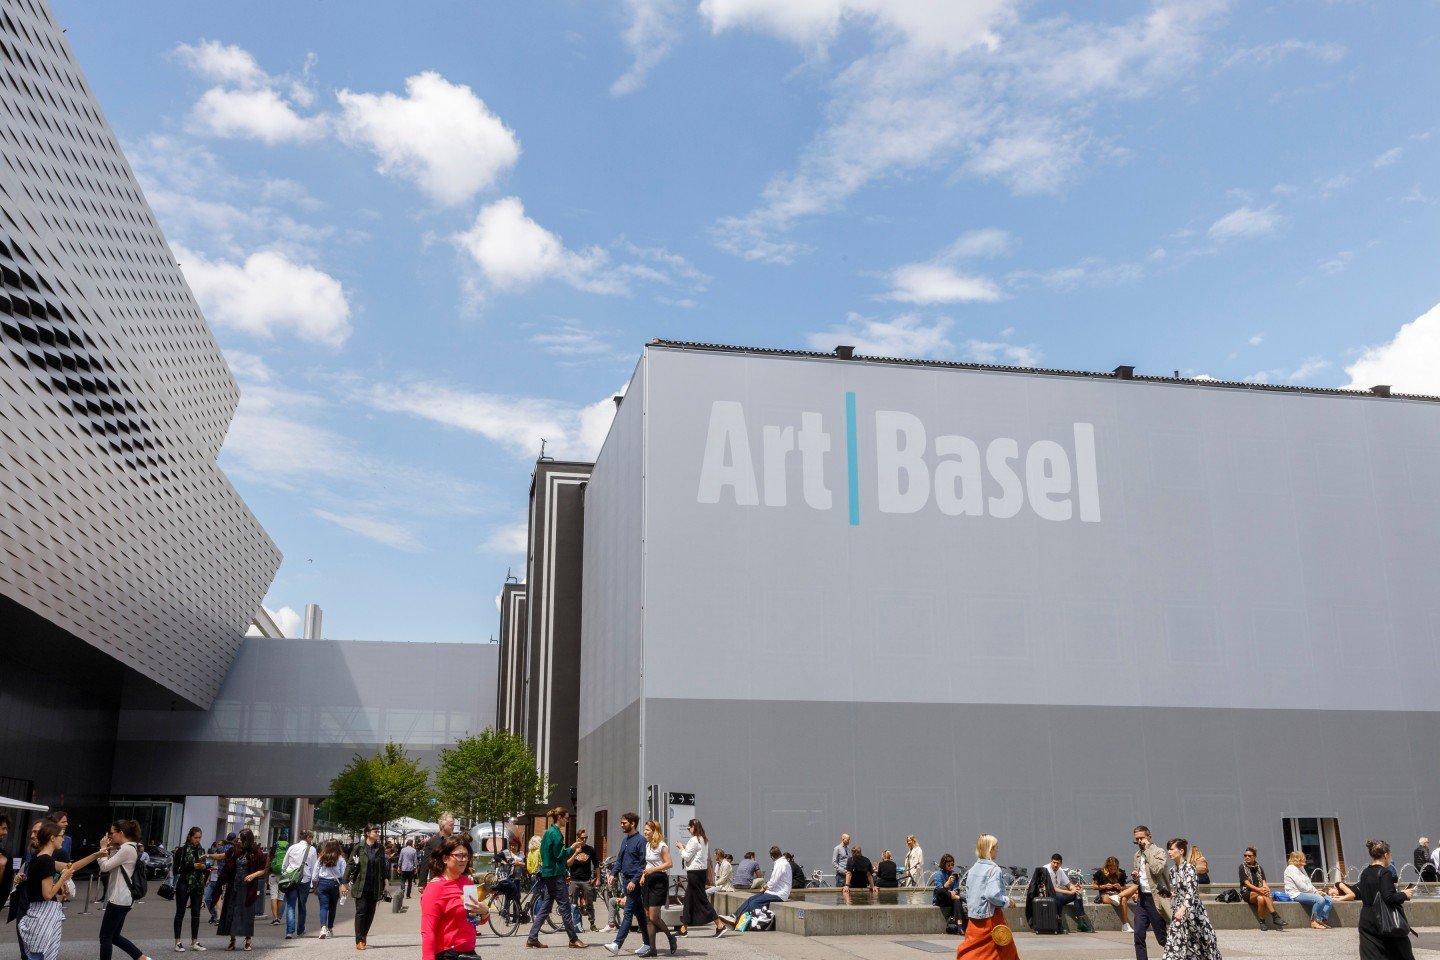 Even though Art Basel was cancelled the design district did not